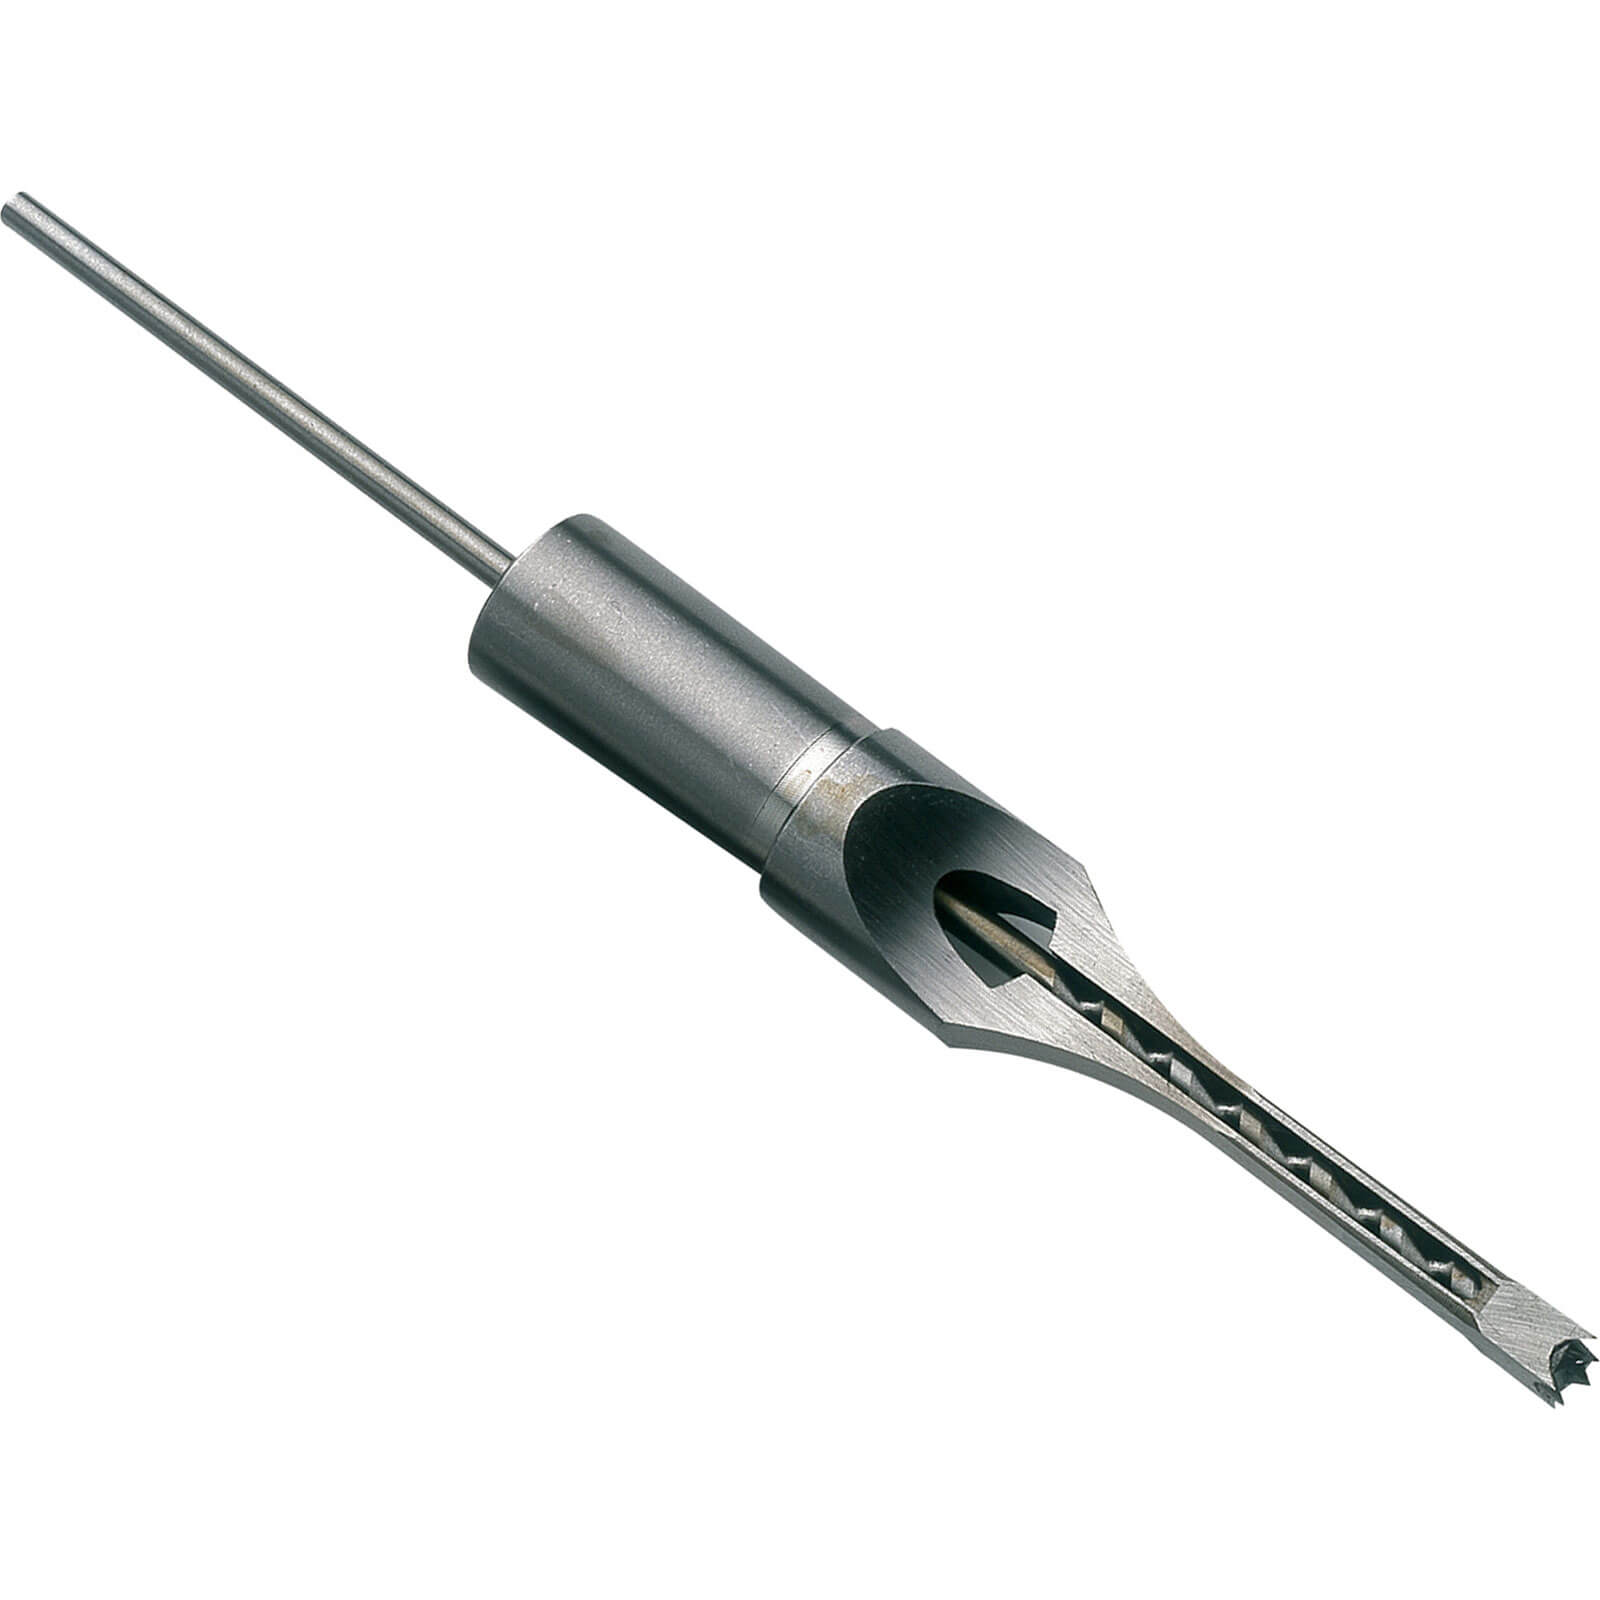 Image of Record Power Mortice Chisel and Bit 3/8"